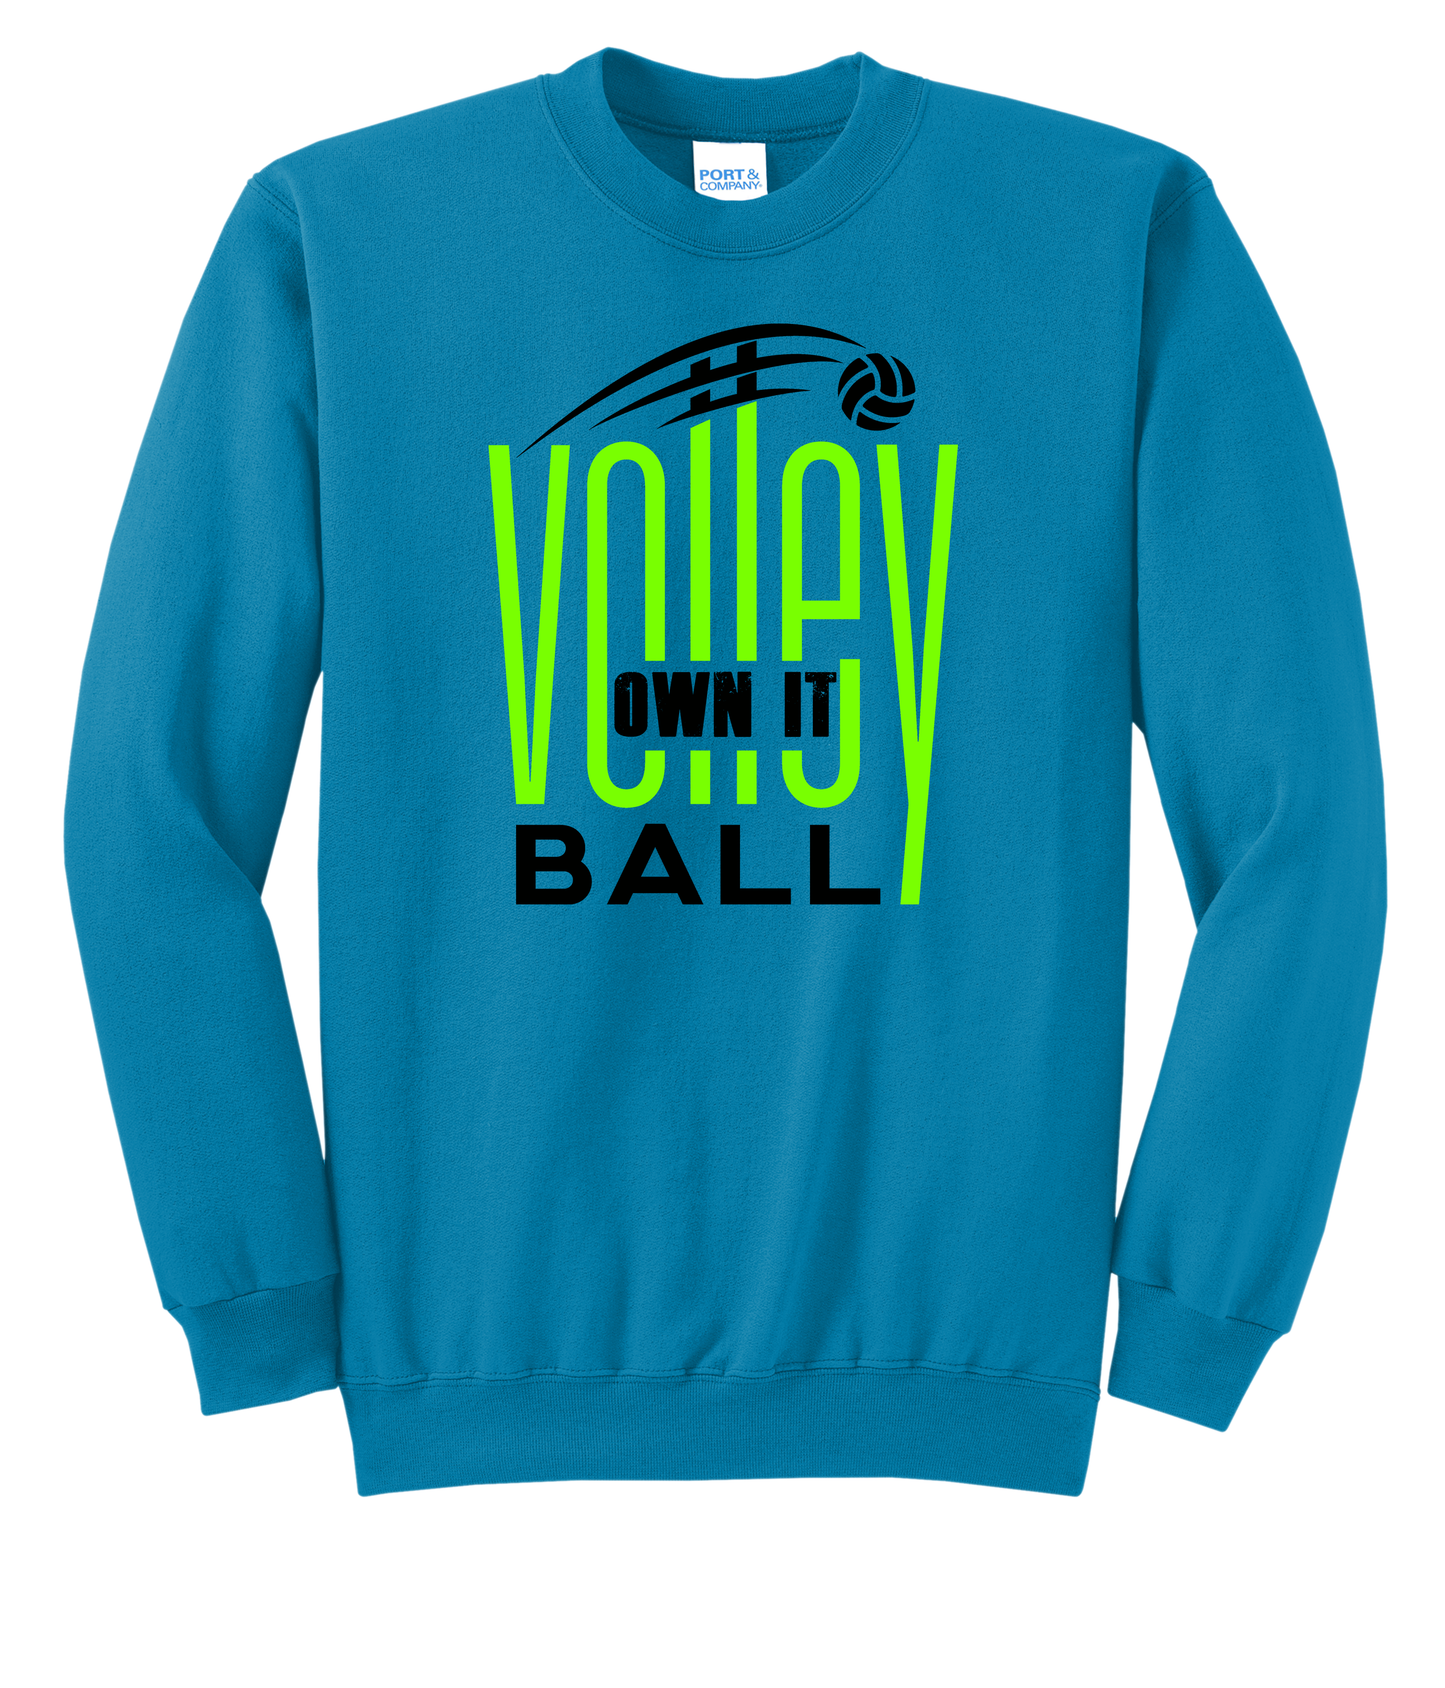 Own It Volleyball Club Crewneck Sweatshirt (Adult) Multiple Colors Available